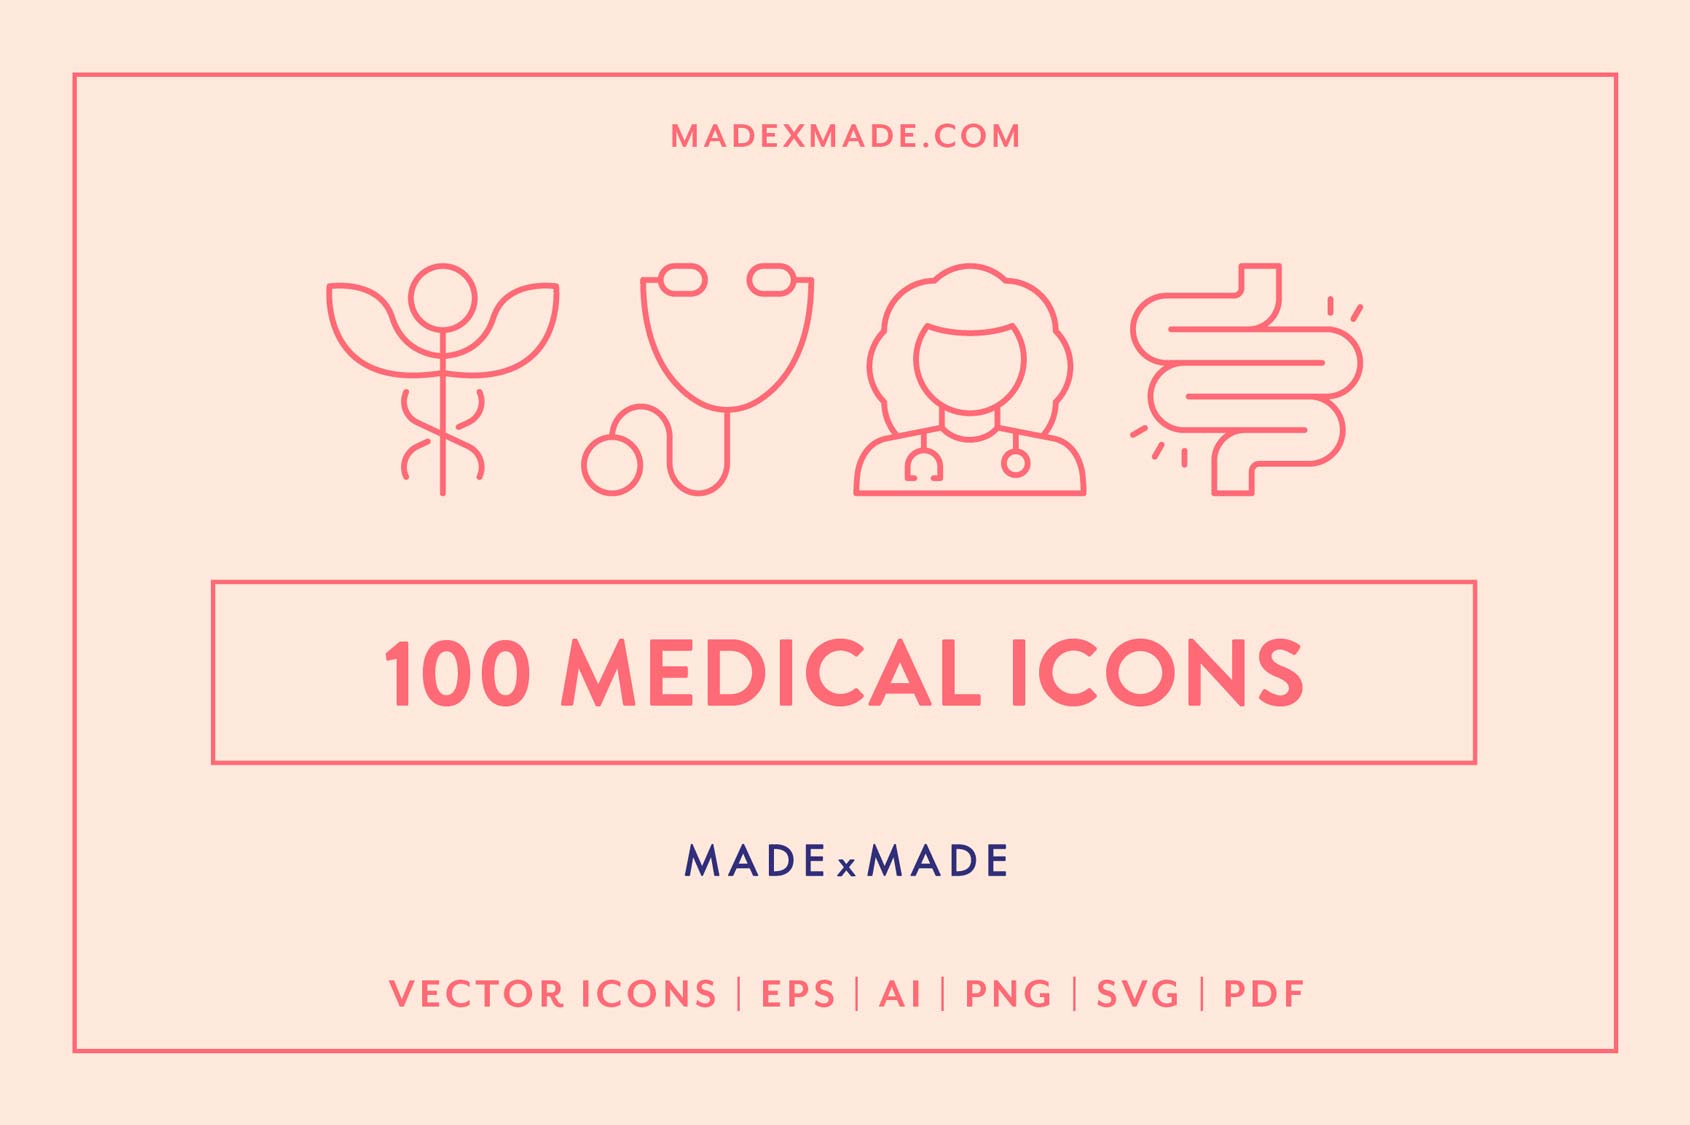 made x made icons medical cover – consistent icons for healthcare, medication, hospitals, doctors, emergency services, med-science, pandemics